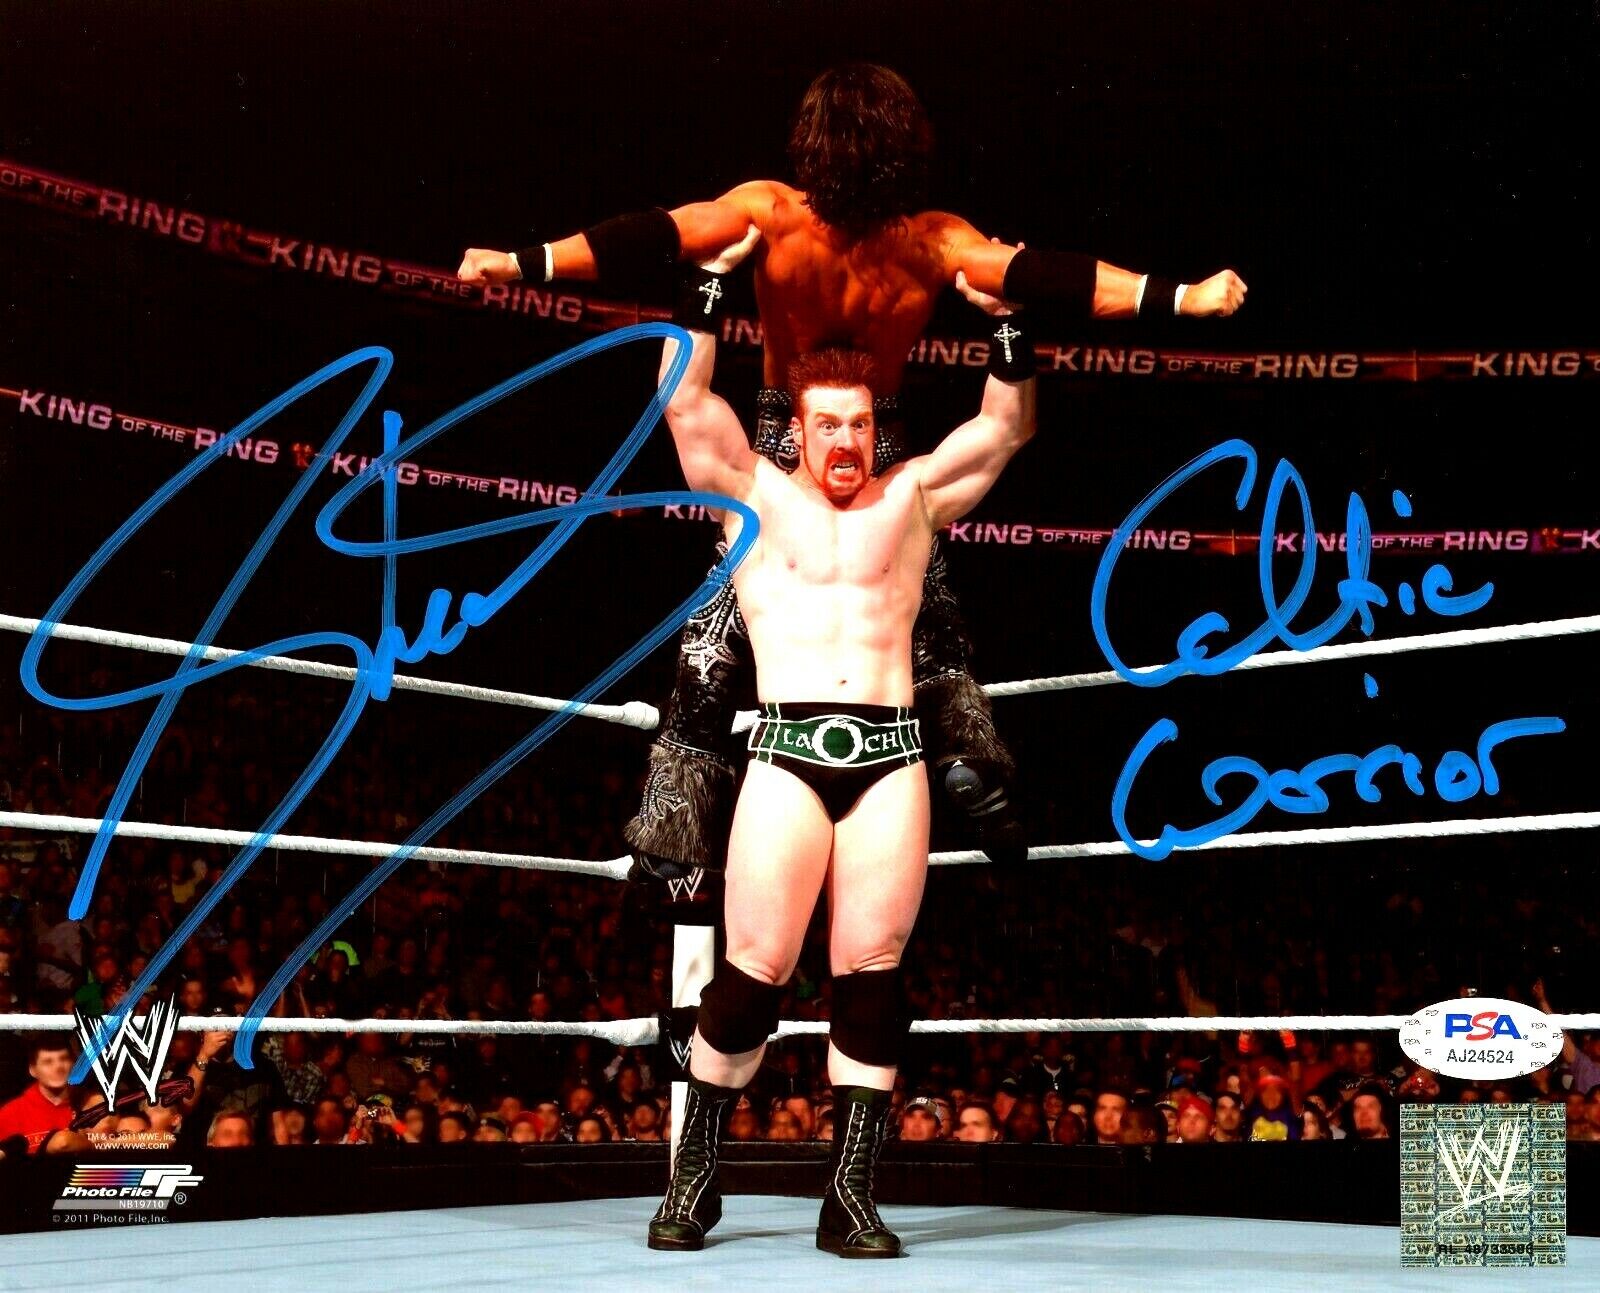 WWE SHEAMUS HAND SIGNED AUTOGRAPHED 8X10 Photo Poster painting WITH PROOF AND PSA DNA COA 1